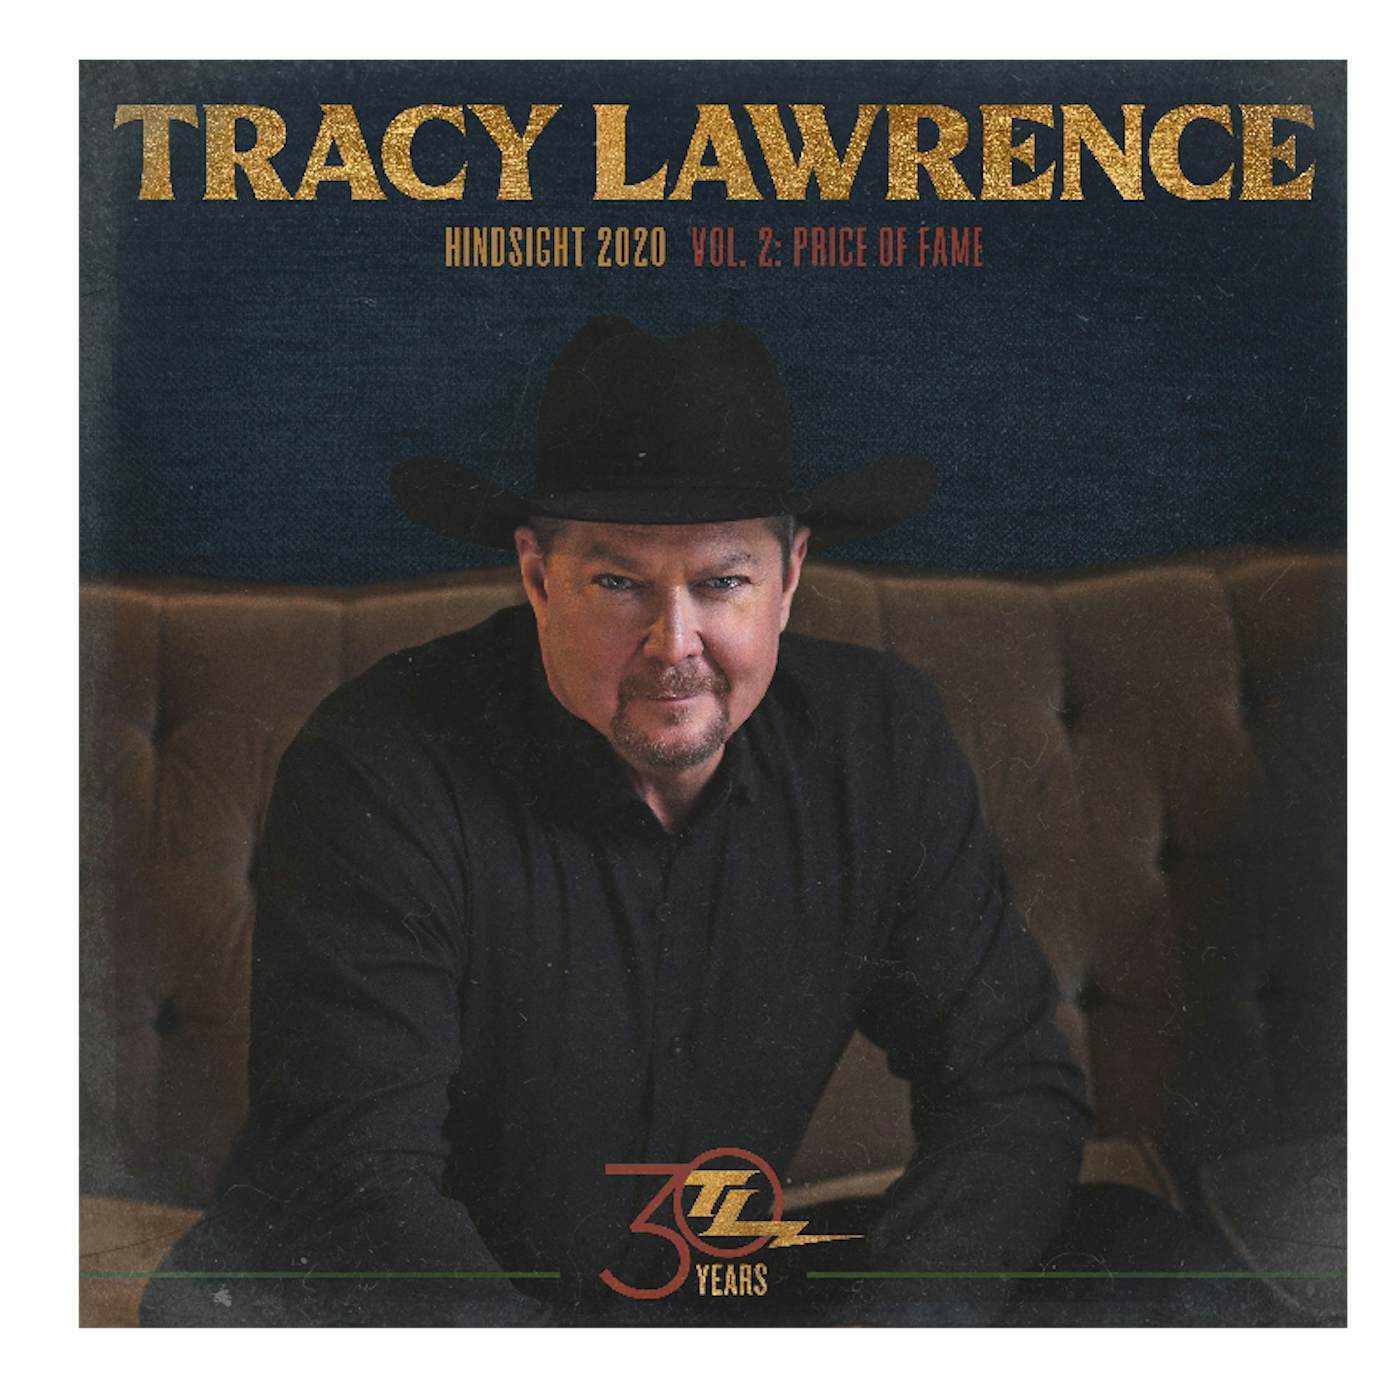 Tracy Lawrence CD- Hindsight 2020: Volume 2